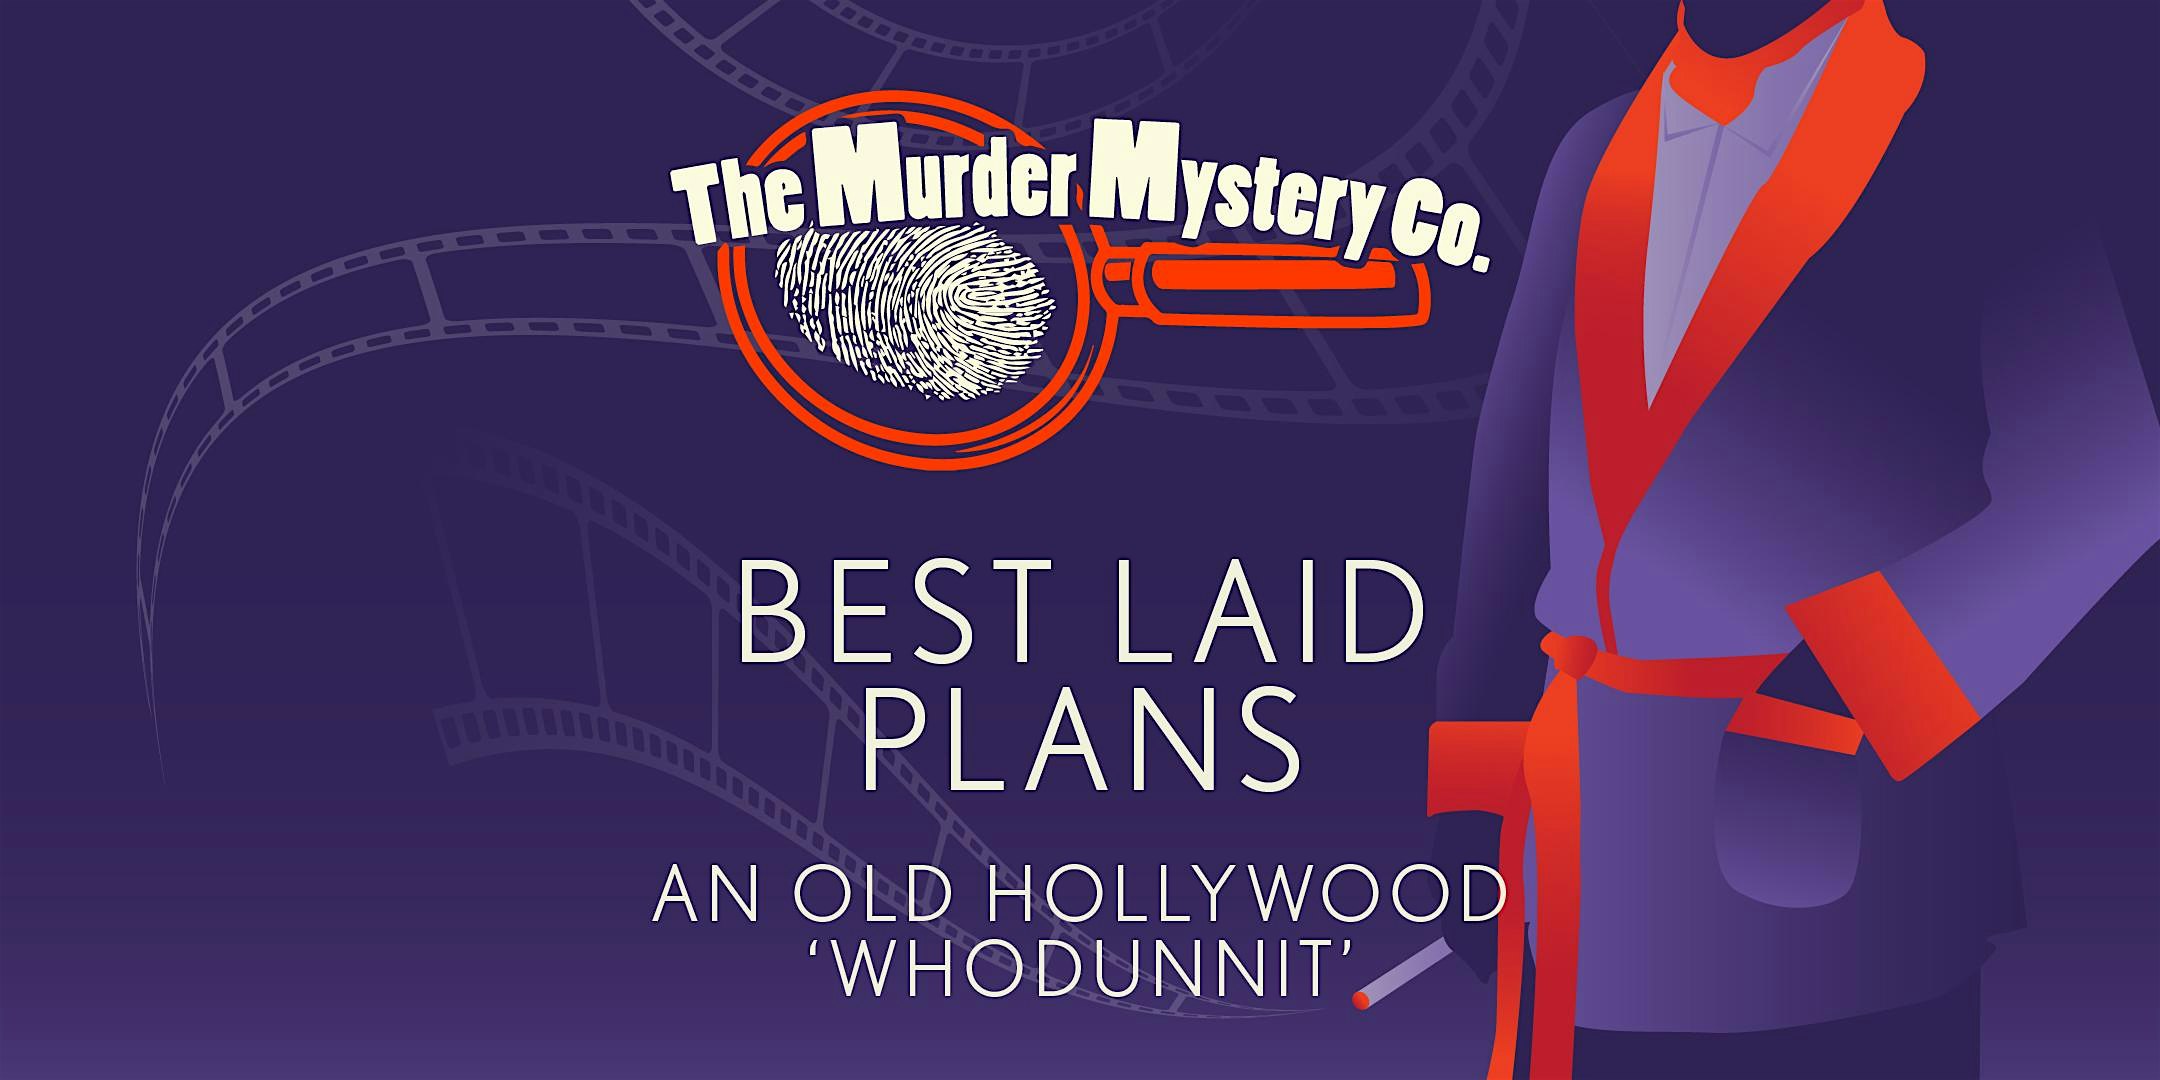 Murder Mystery Dinner Theatre Show in Chicago: Best Laid Plans